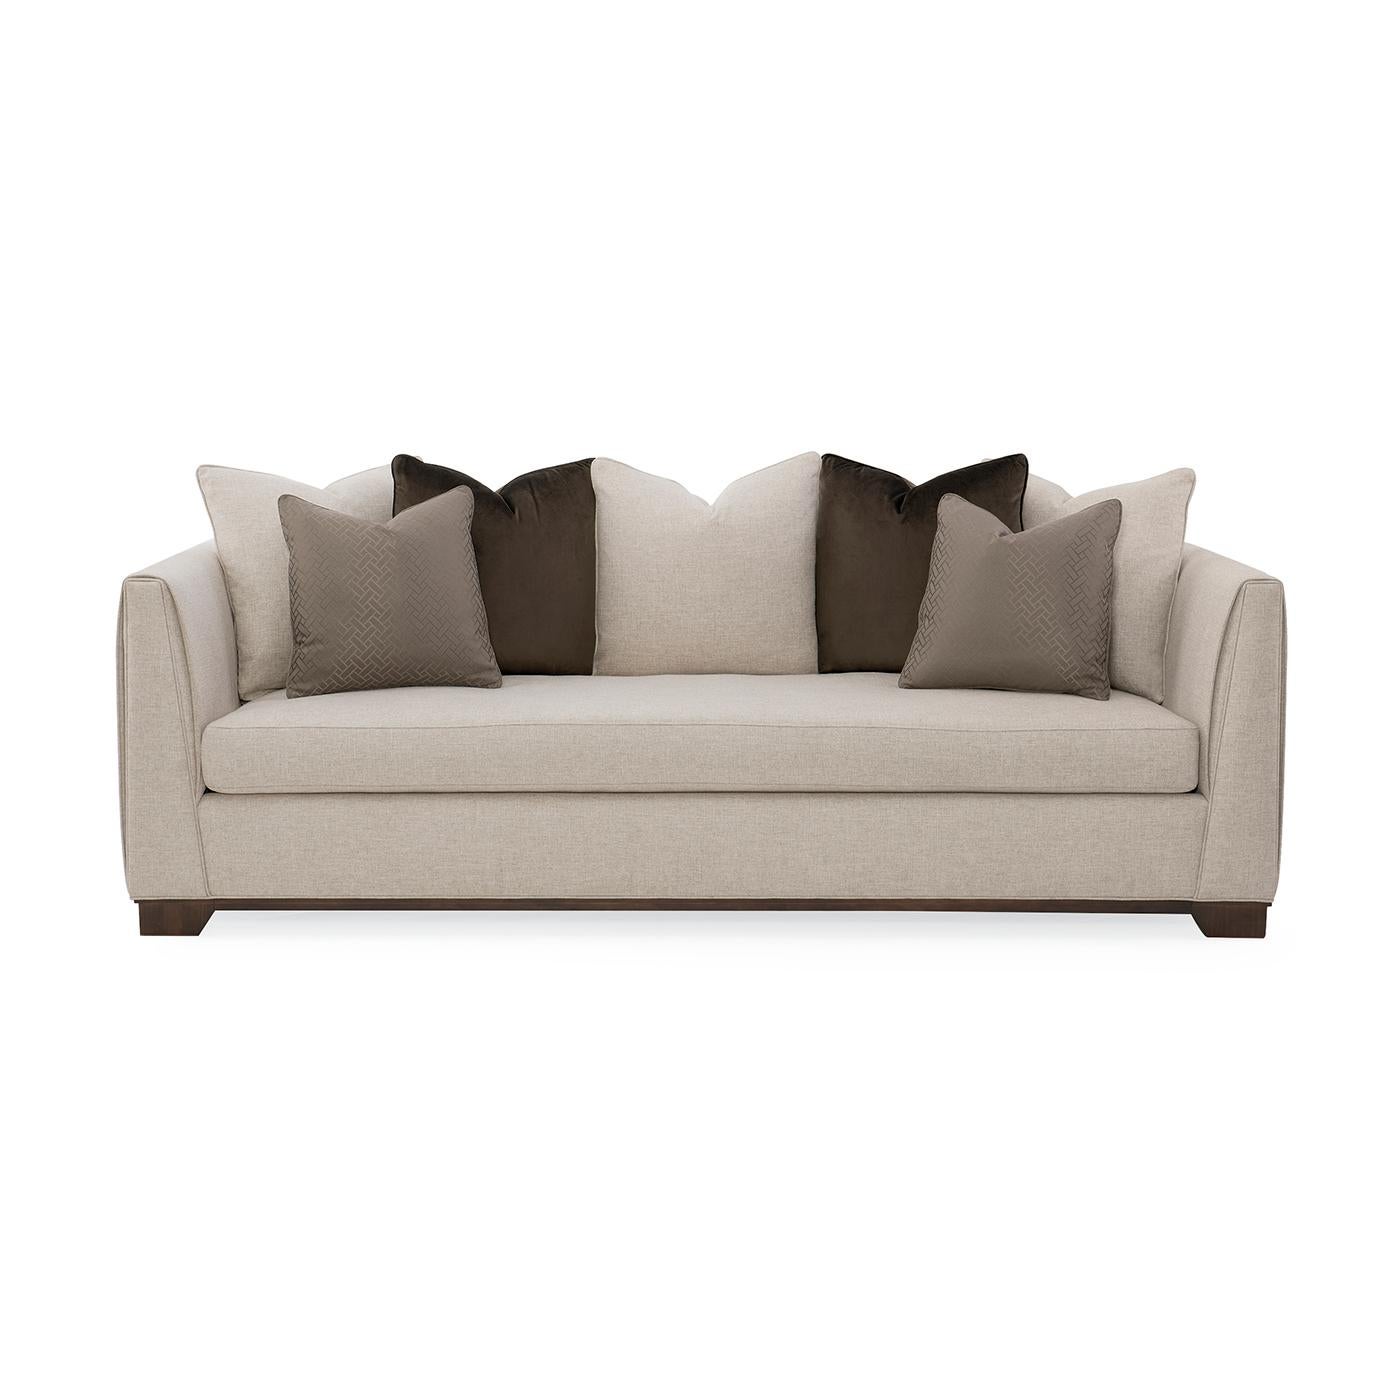 This sofa with squared corners is impeccably tailored. Fully encased in soft brushed neutral linen-look fabric, the back and arms have a vertical stitch detail and a slender blanket wrap feature that envelopes the tapered track arm design. The bench